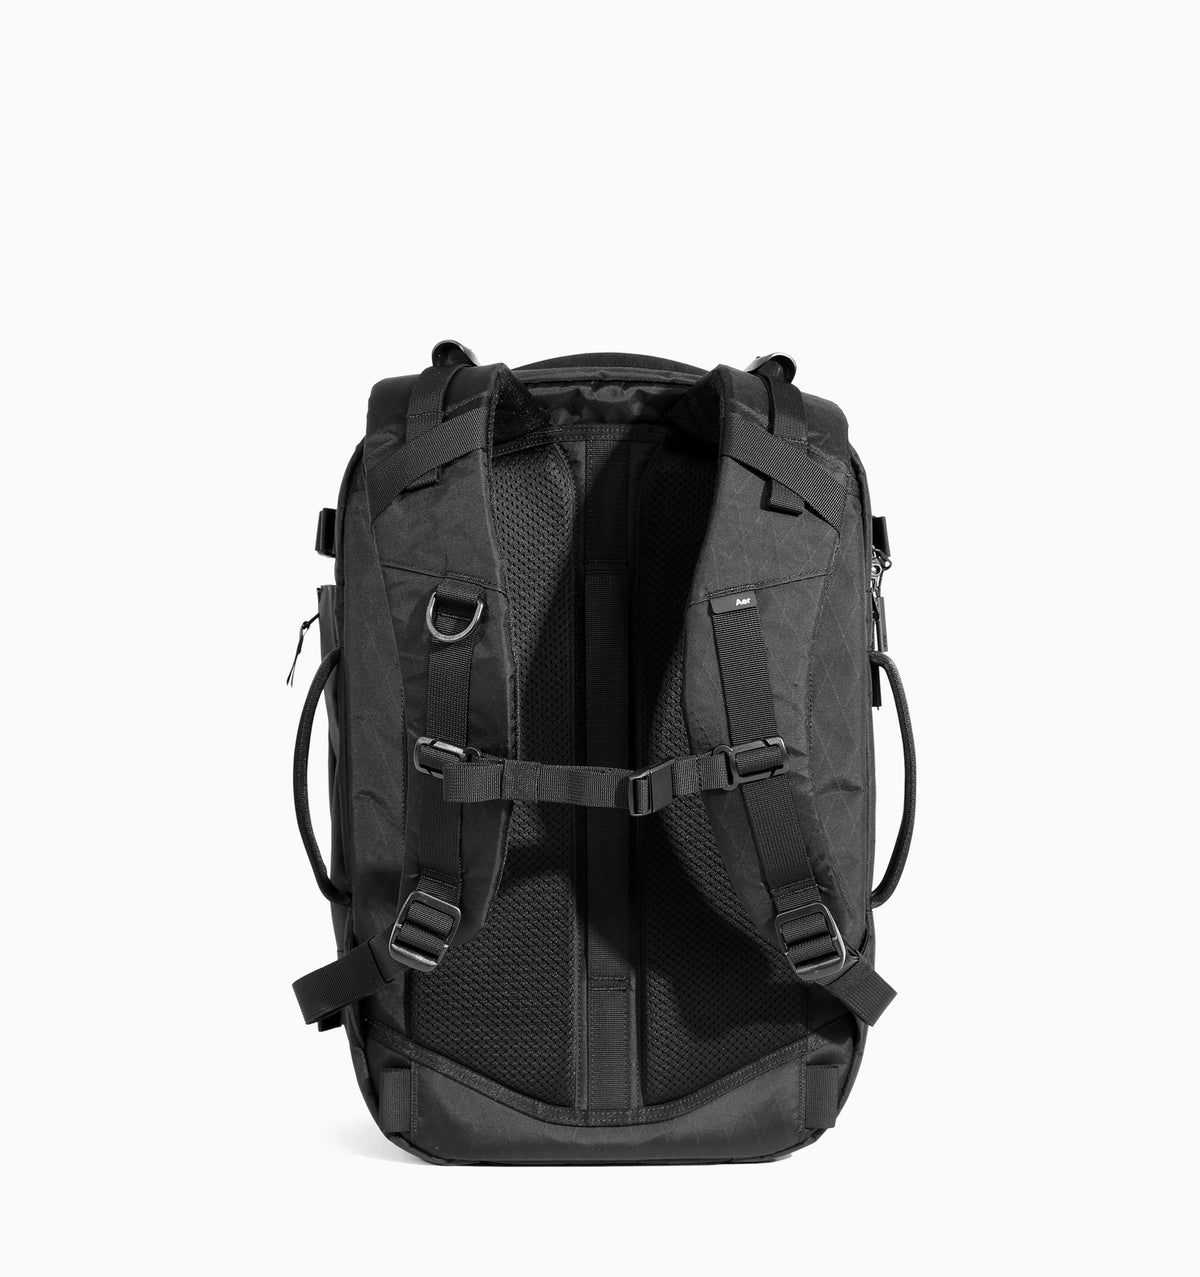 Aer Travel Pack 3 Small X-PAC